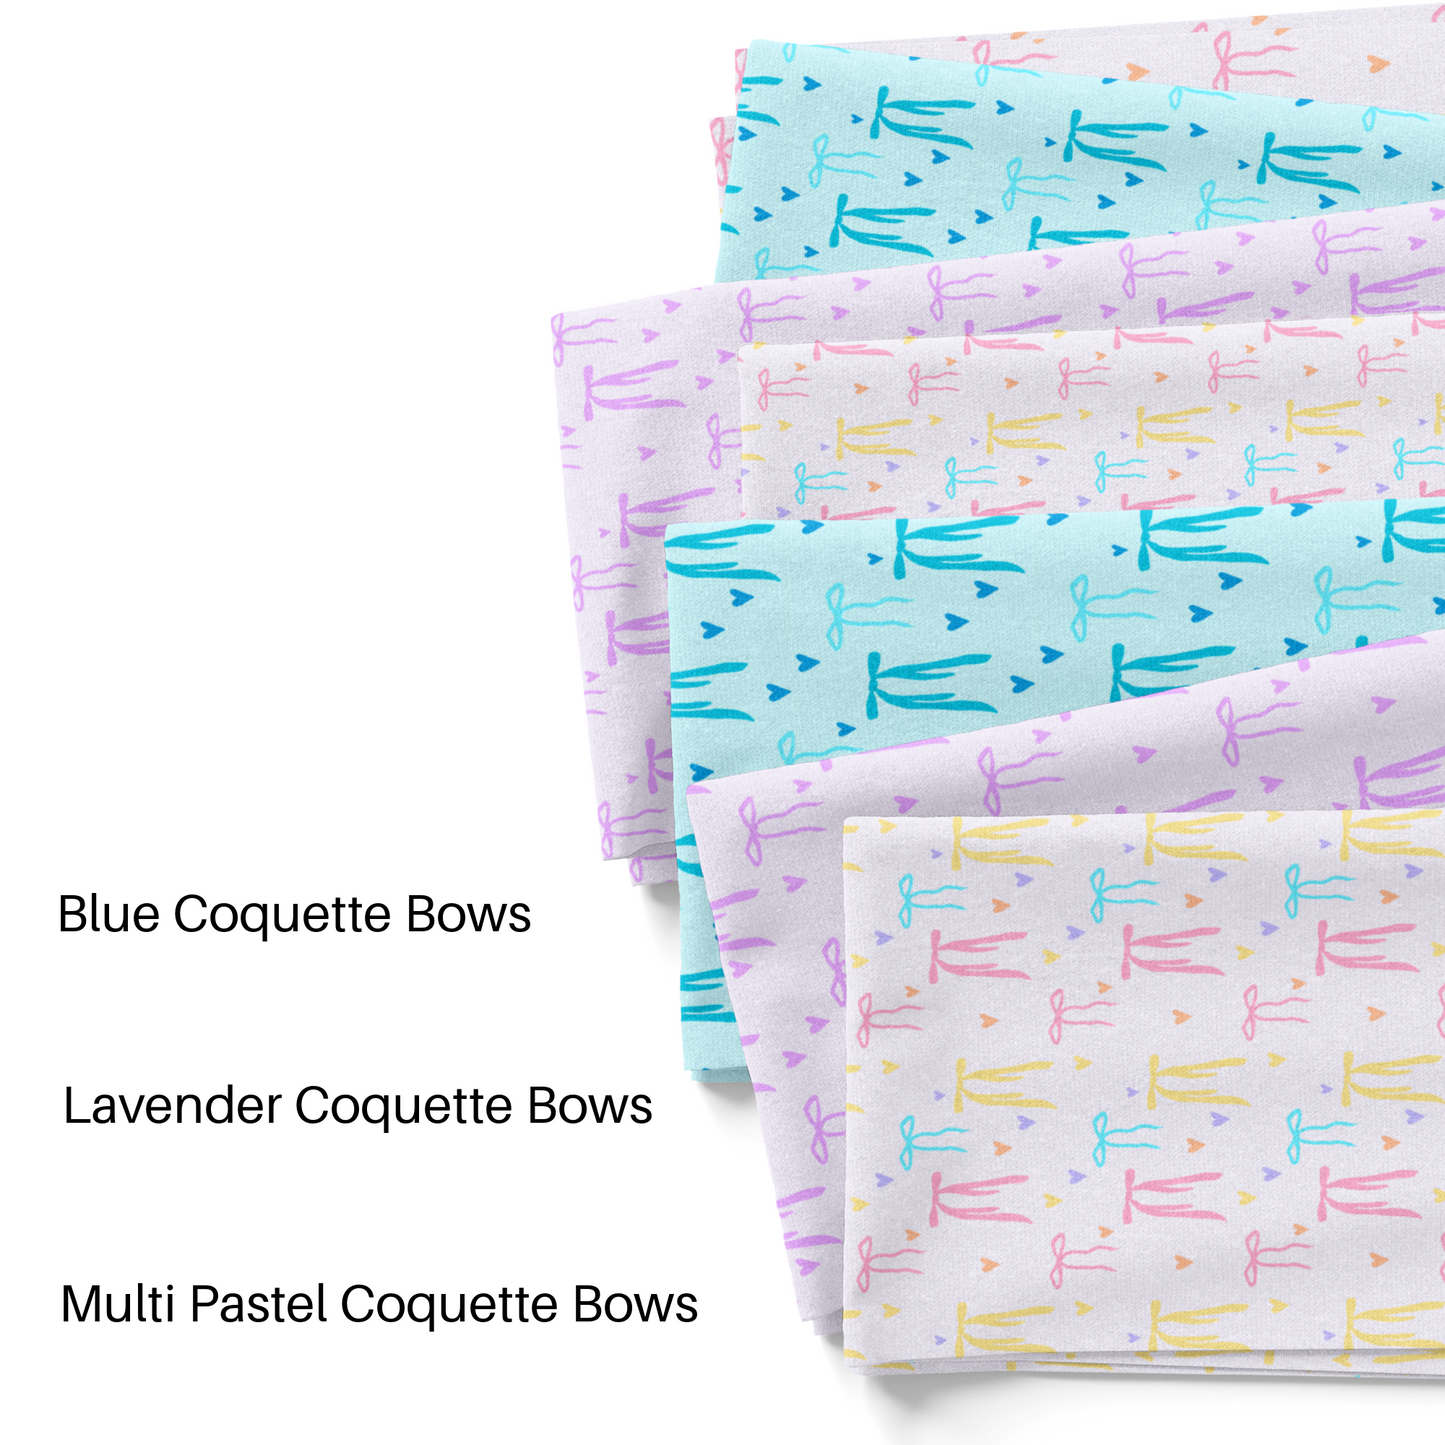 Glamby's Graphics Coquette bow fabric by the yard swatches.